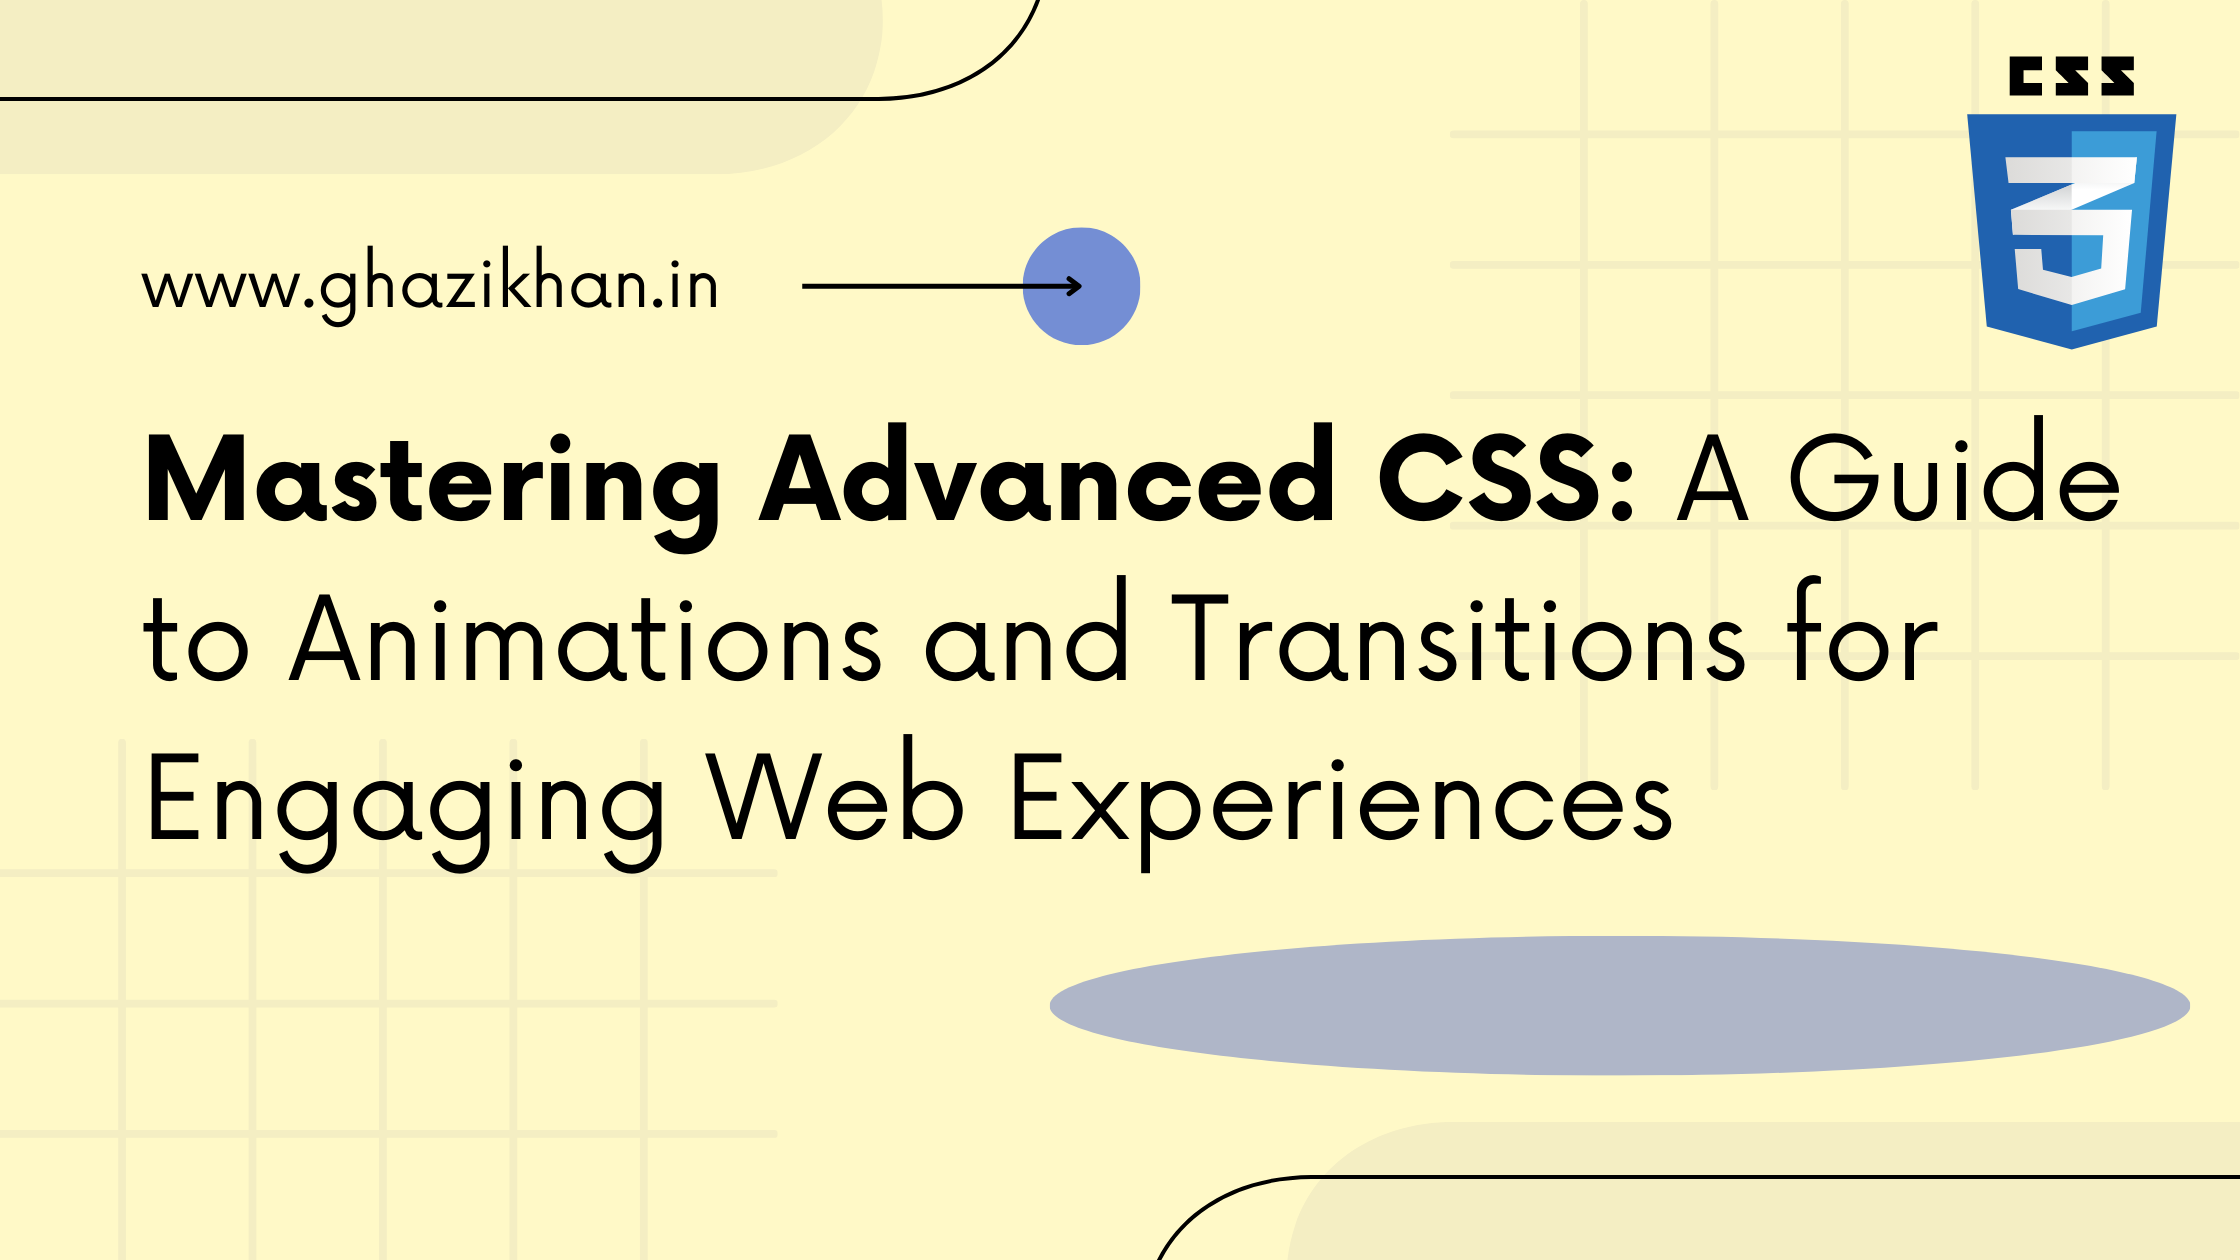 Mastering Advanced CSS: A Guide to Animations and Transitions for Engaging Web Experiences